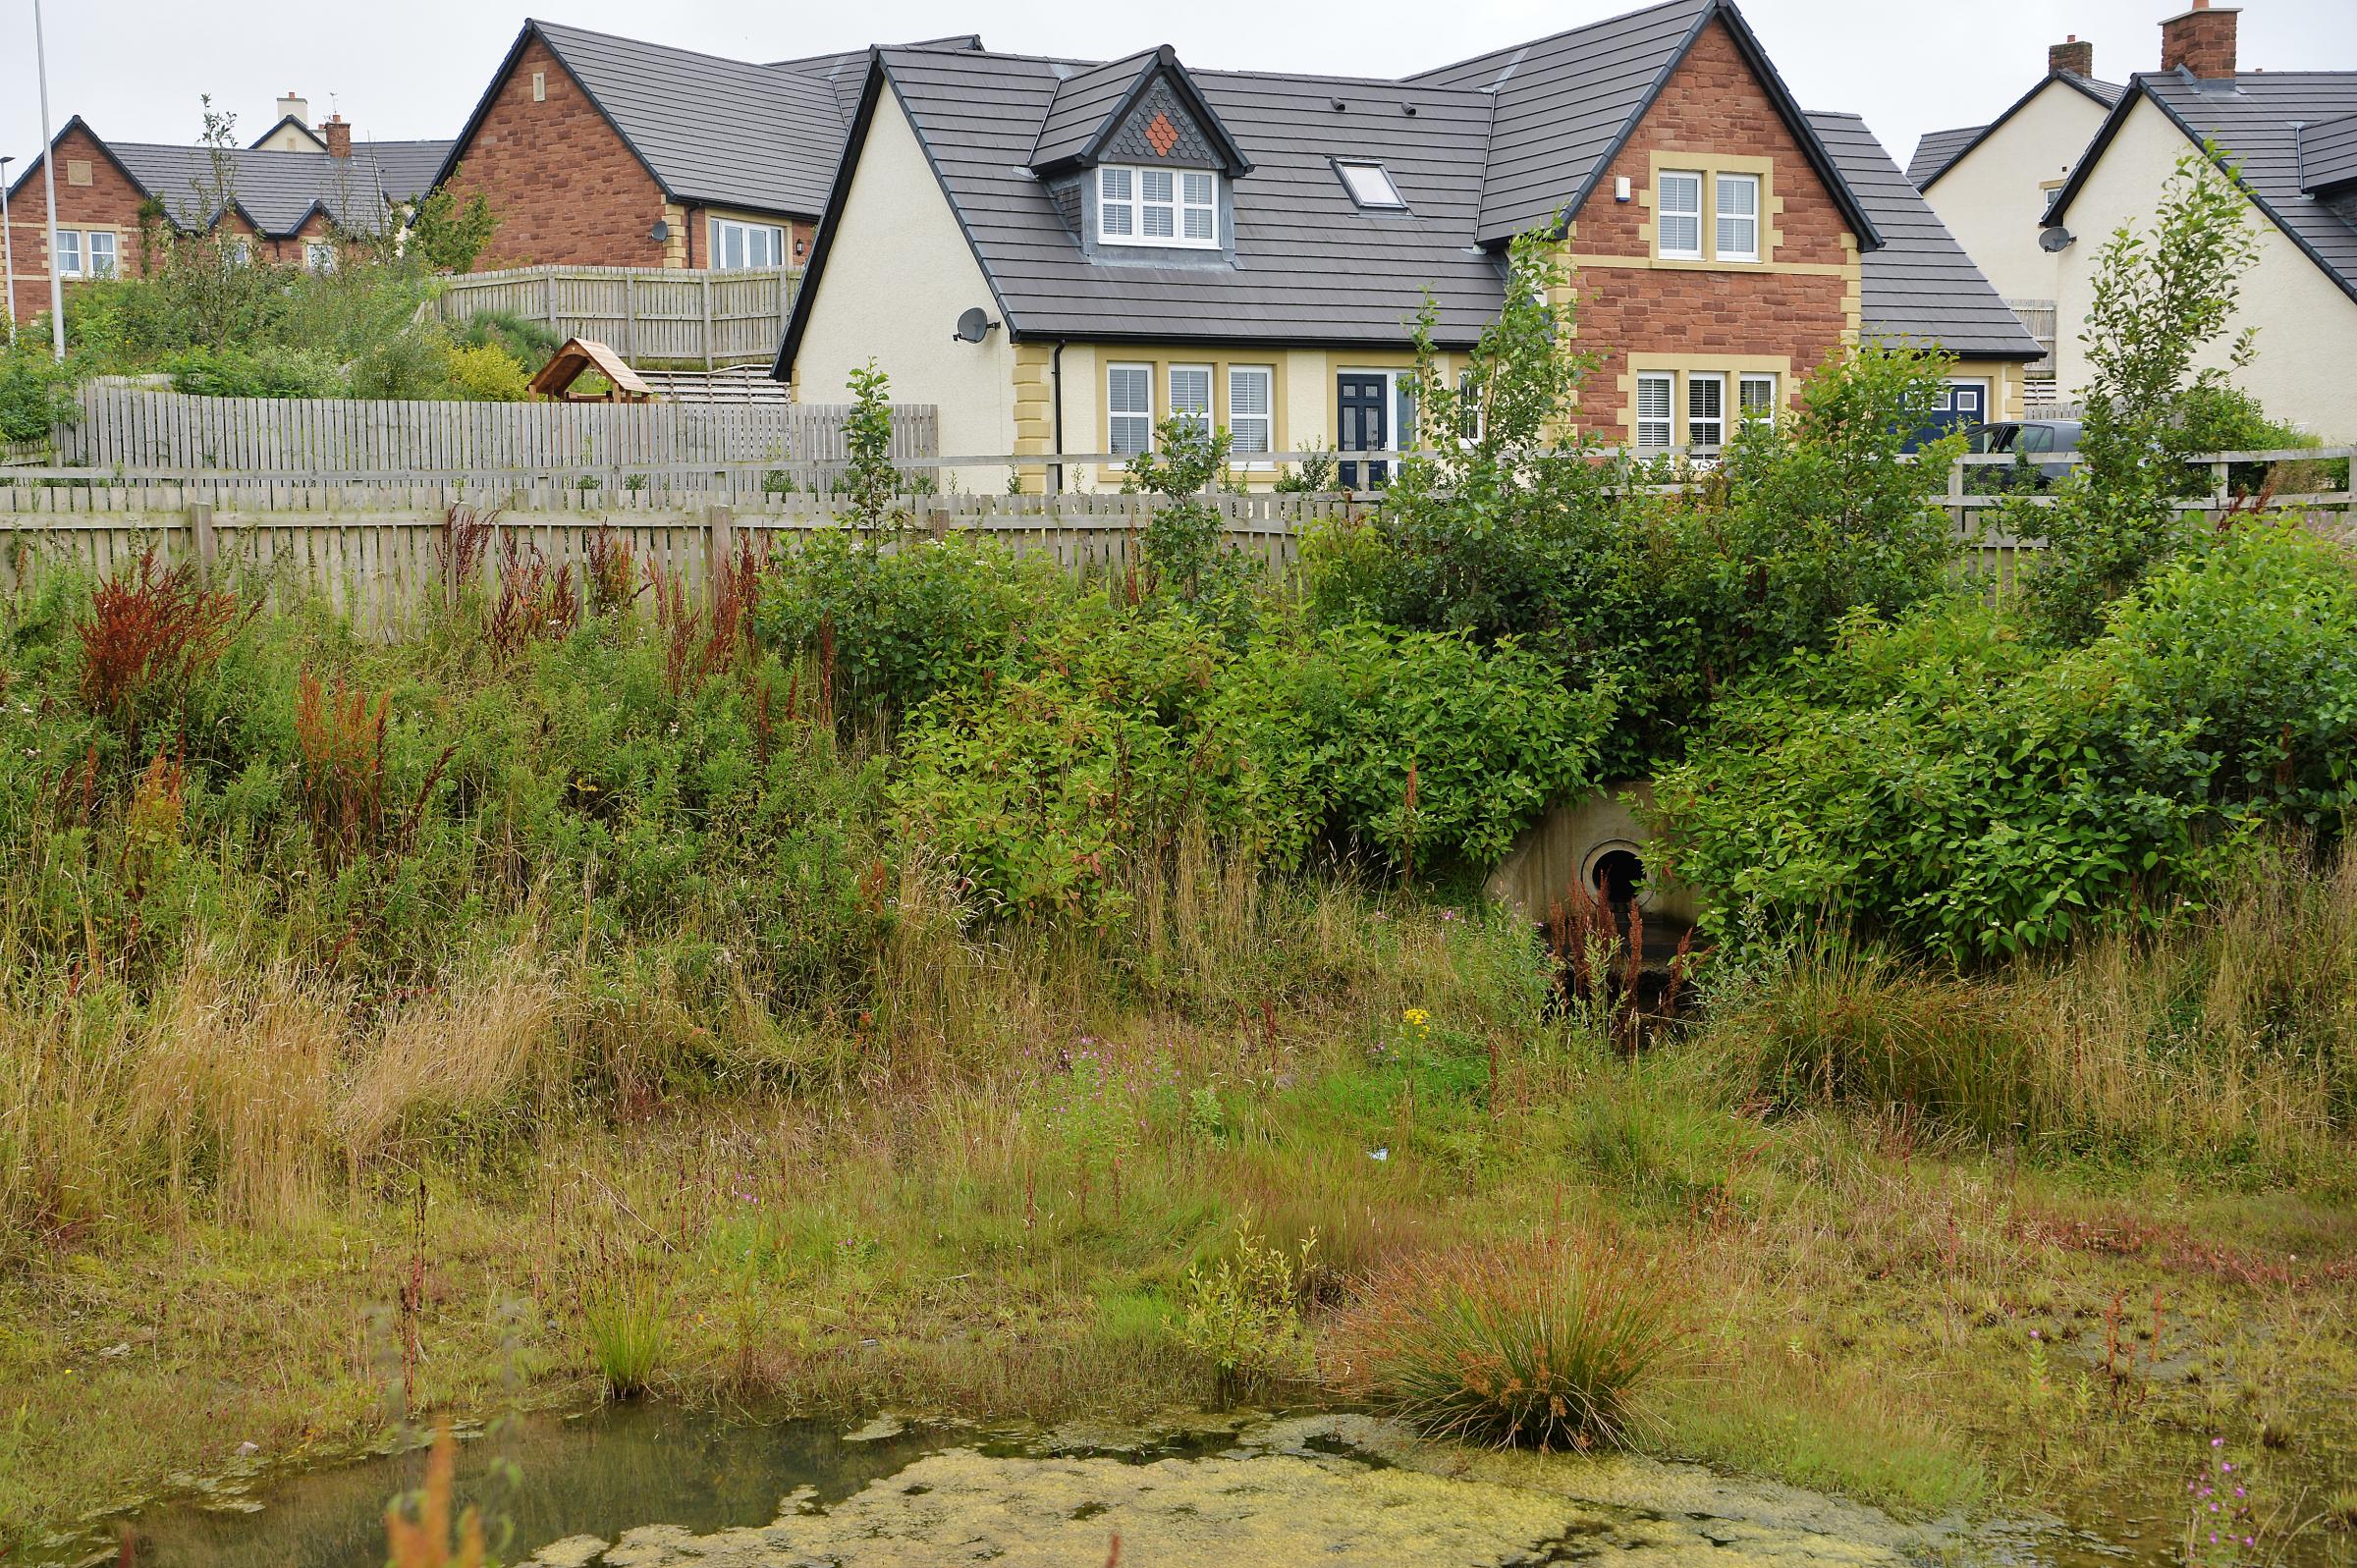 Wilson Howe Pond on the Story Homes development in Whitehaven.PHOTO TOM KAY 6 AUGUST 2019.